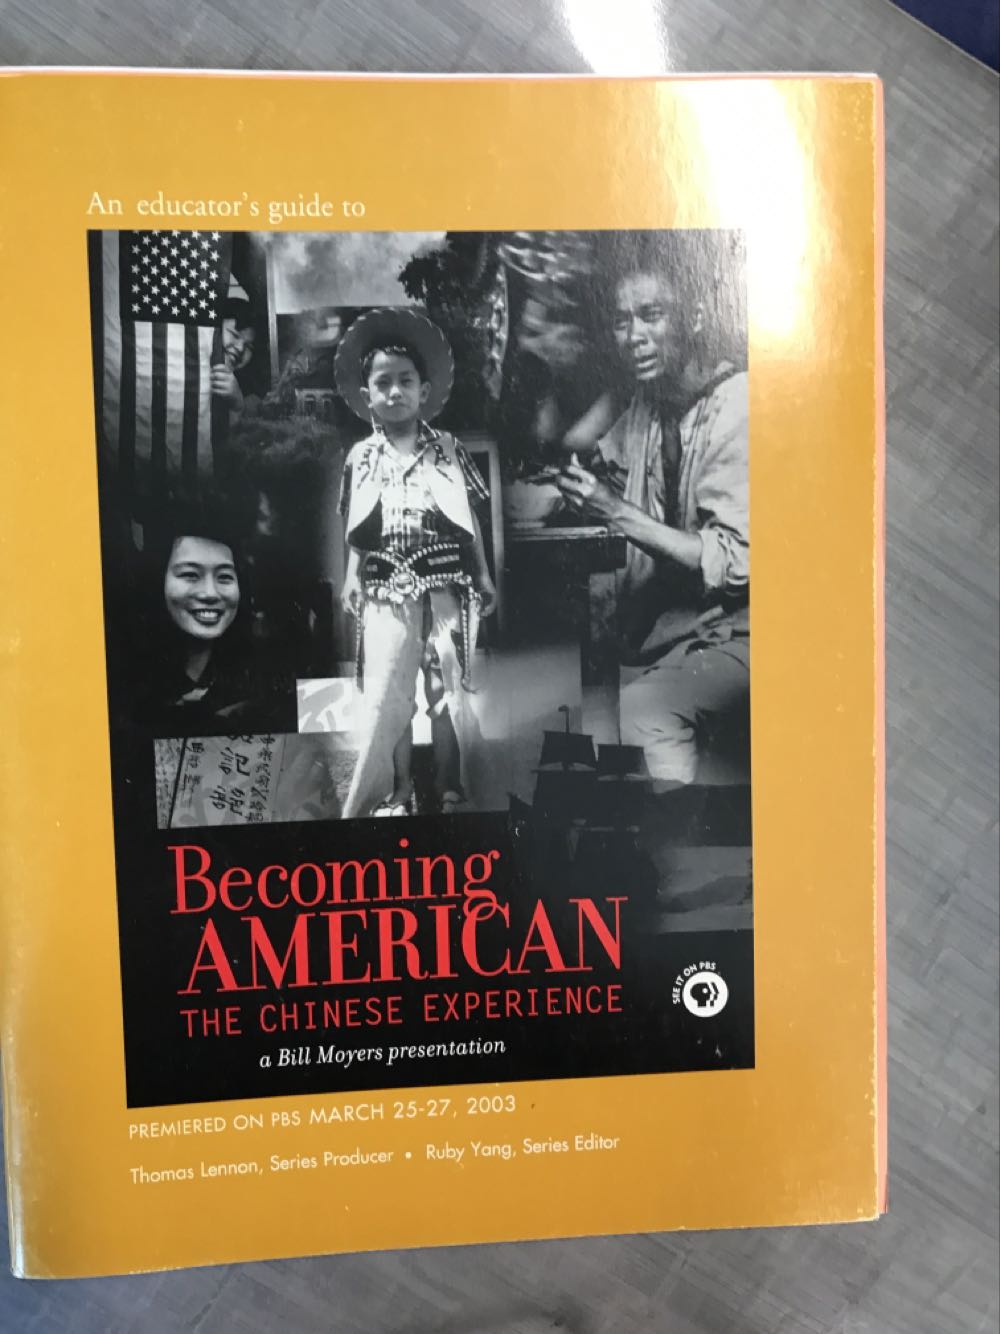 Becoming American The Chinese Experience - Bill Moyers (Facing History & Ourselves National) book collectible - Main Image 1